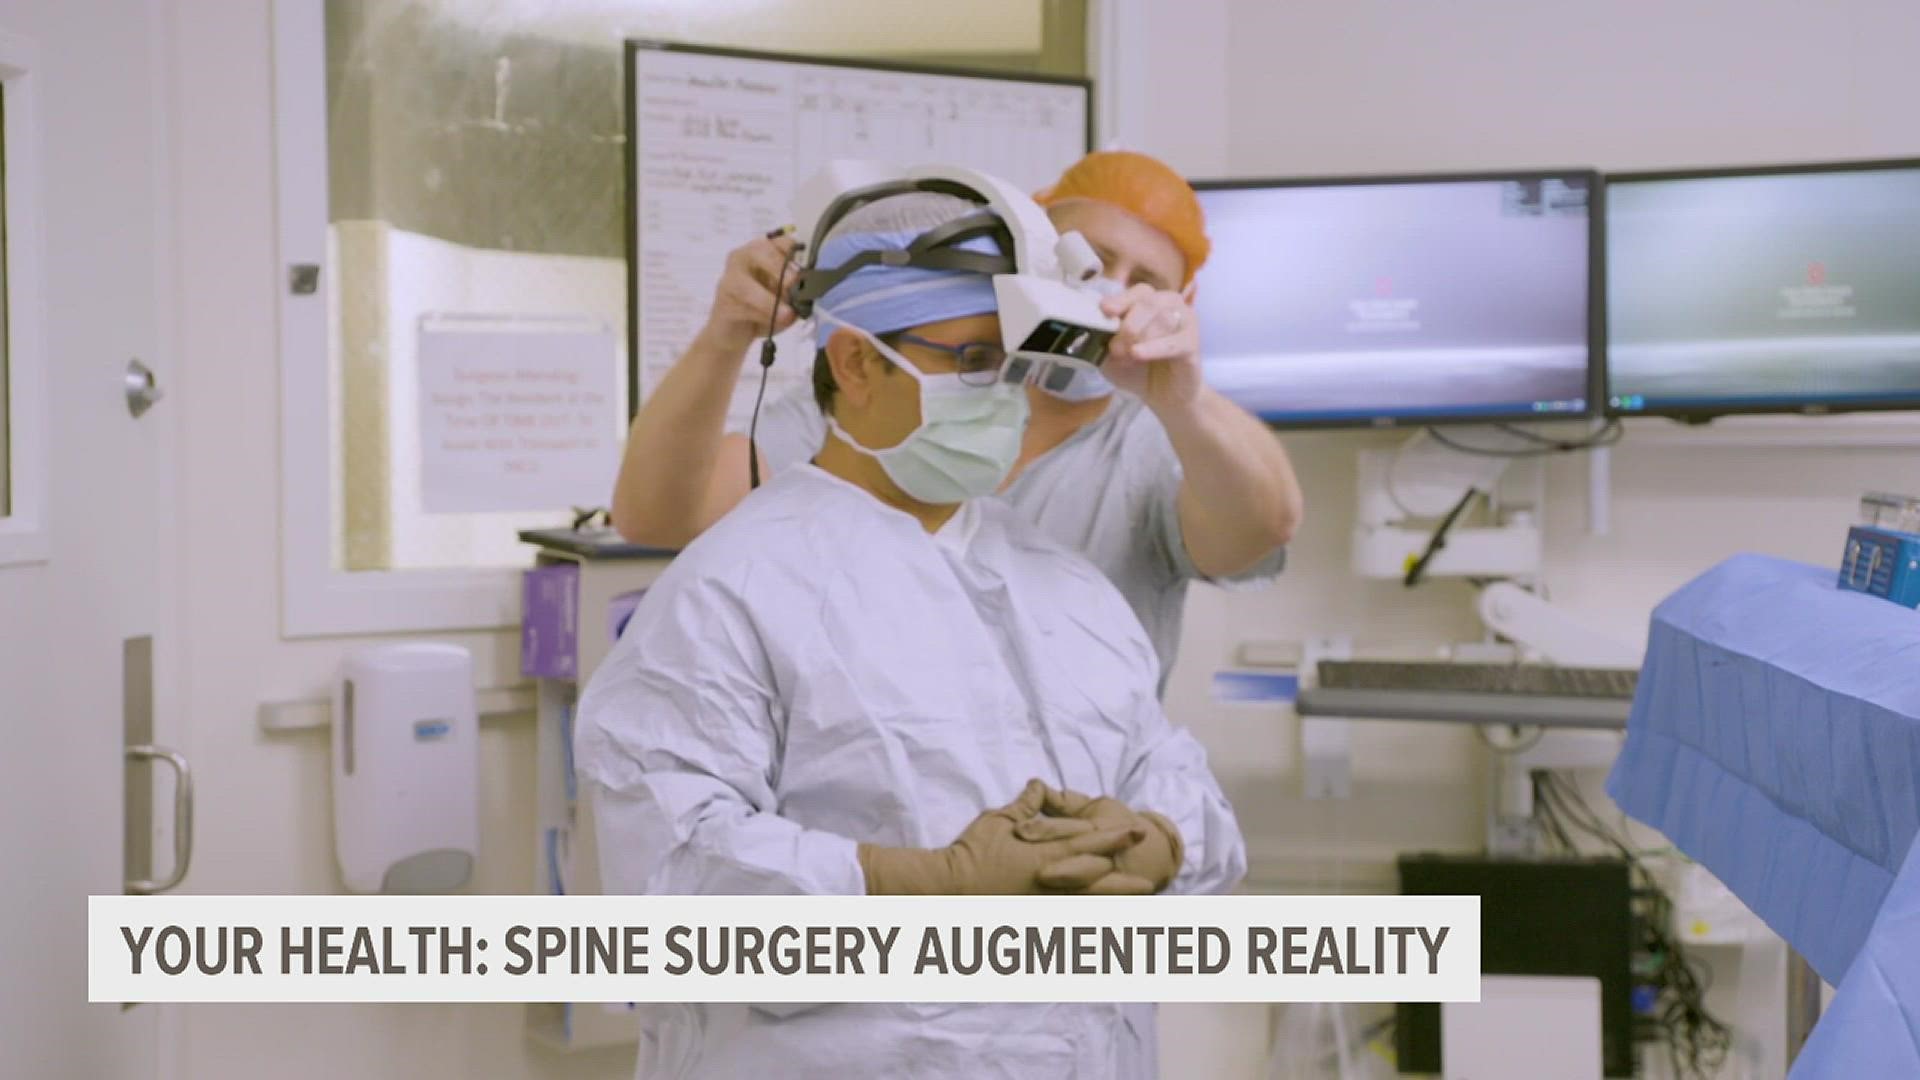 During surgery, the high-tech guidance system means surgeons don't have to take their eyes off their patients, providing more precise and efficient back procedures.